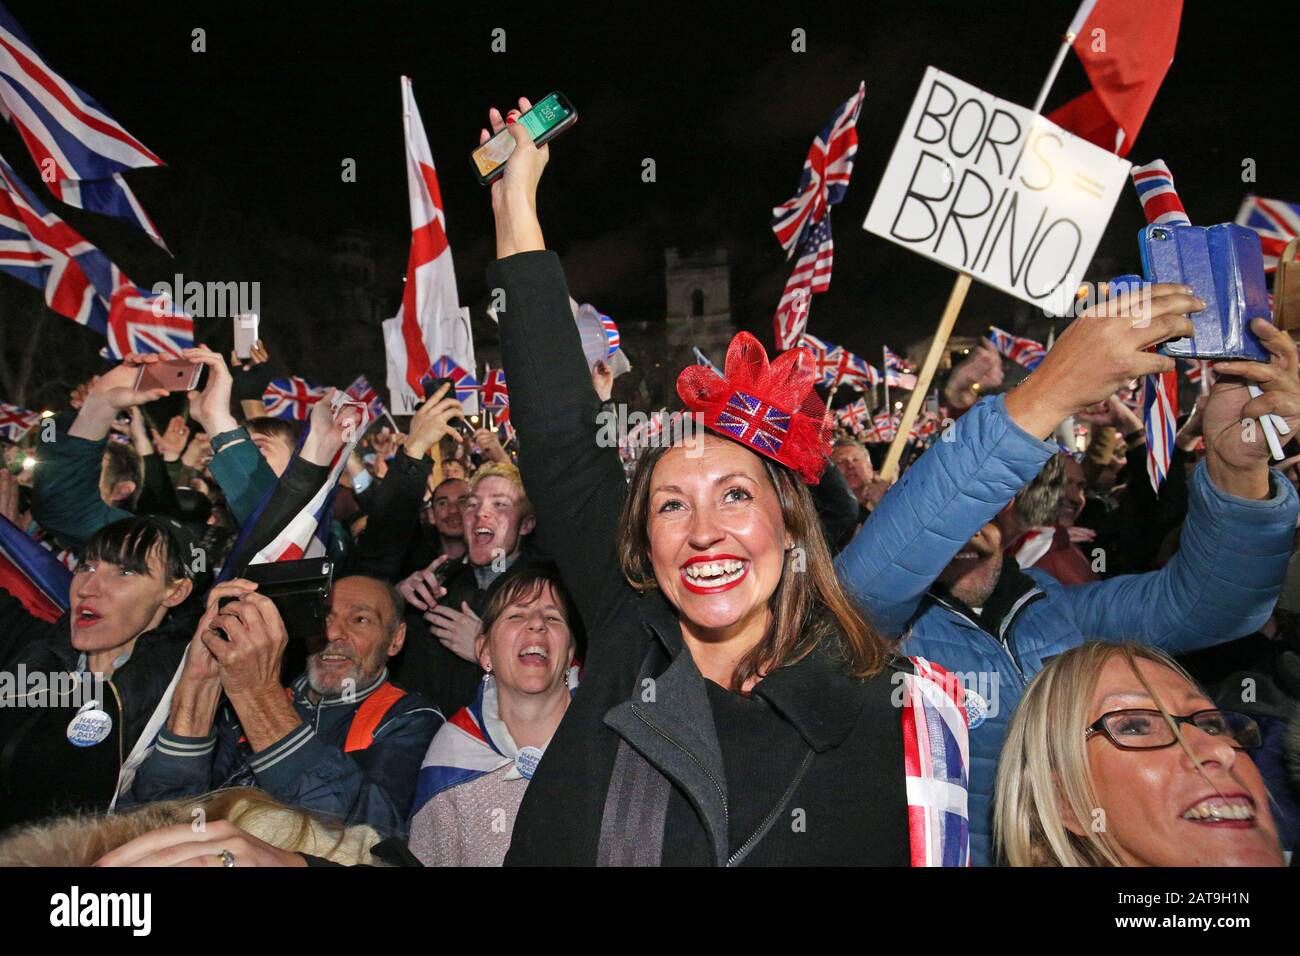 Pro-Brexit supporters celebrate in Parliament Square, London, after the UK left the European Union on Friday, ending 47 years of close and sometimes uncomfortable ties to Brussels. Stock Photo